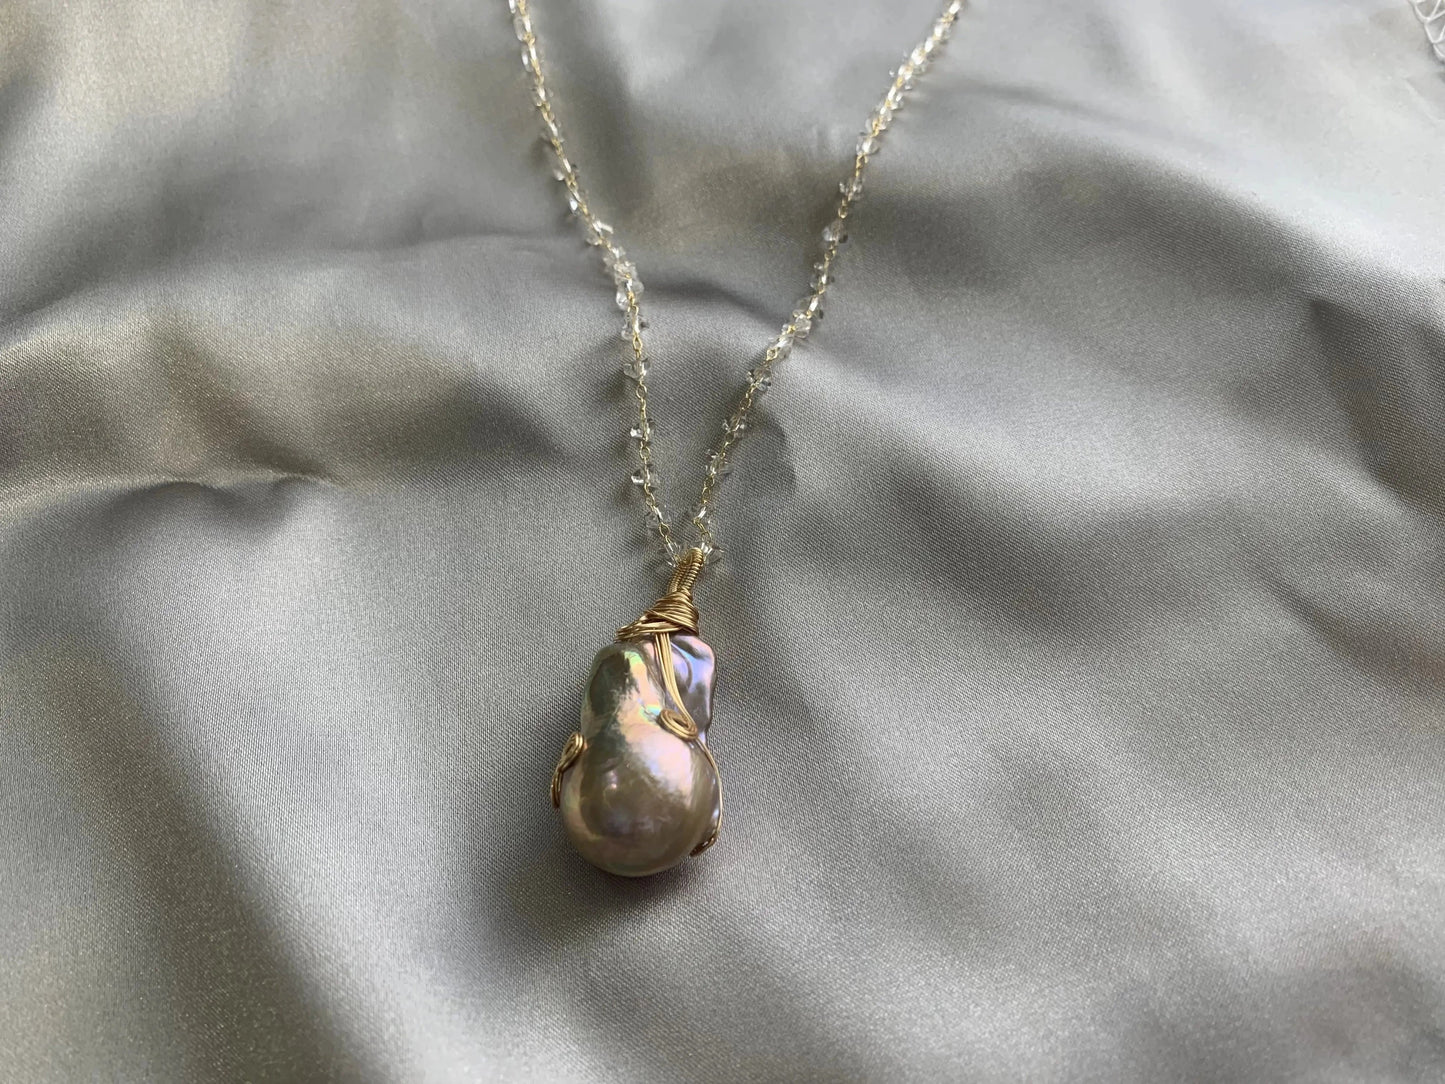 Baroque pearl pendant necklaces from SHOPQAQ